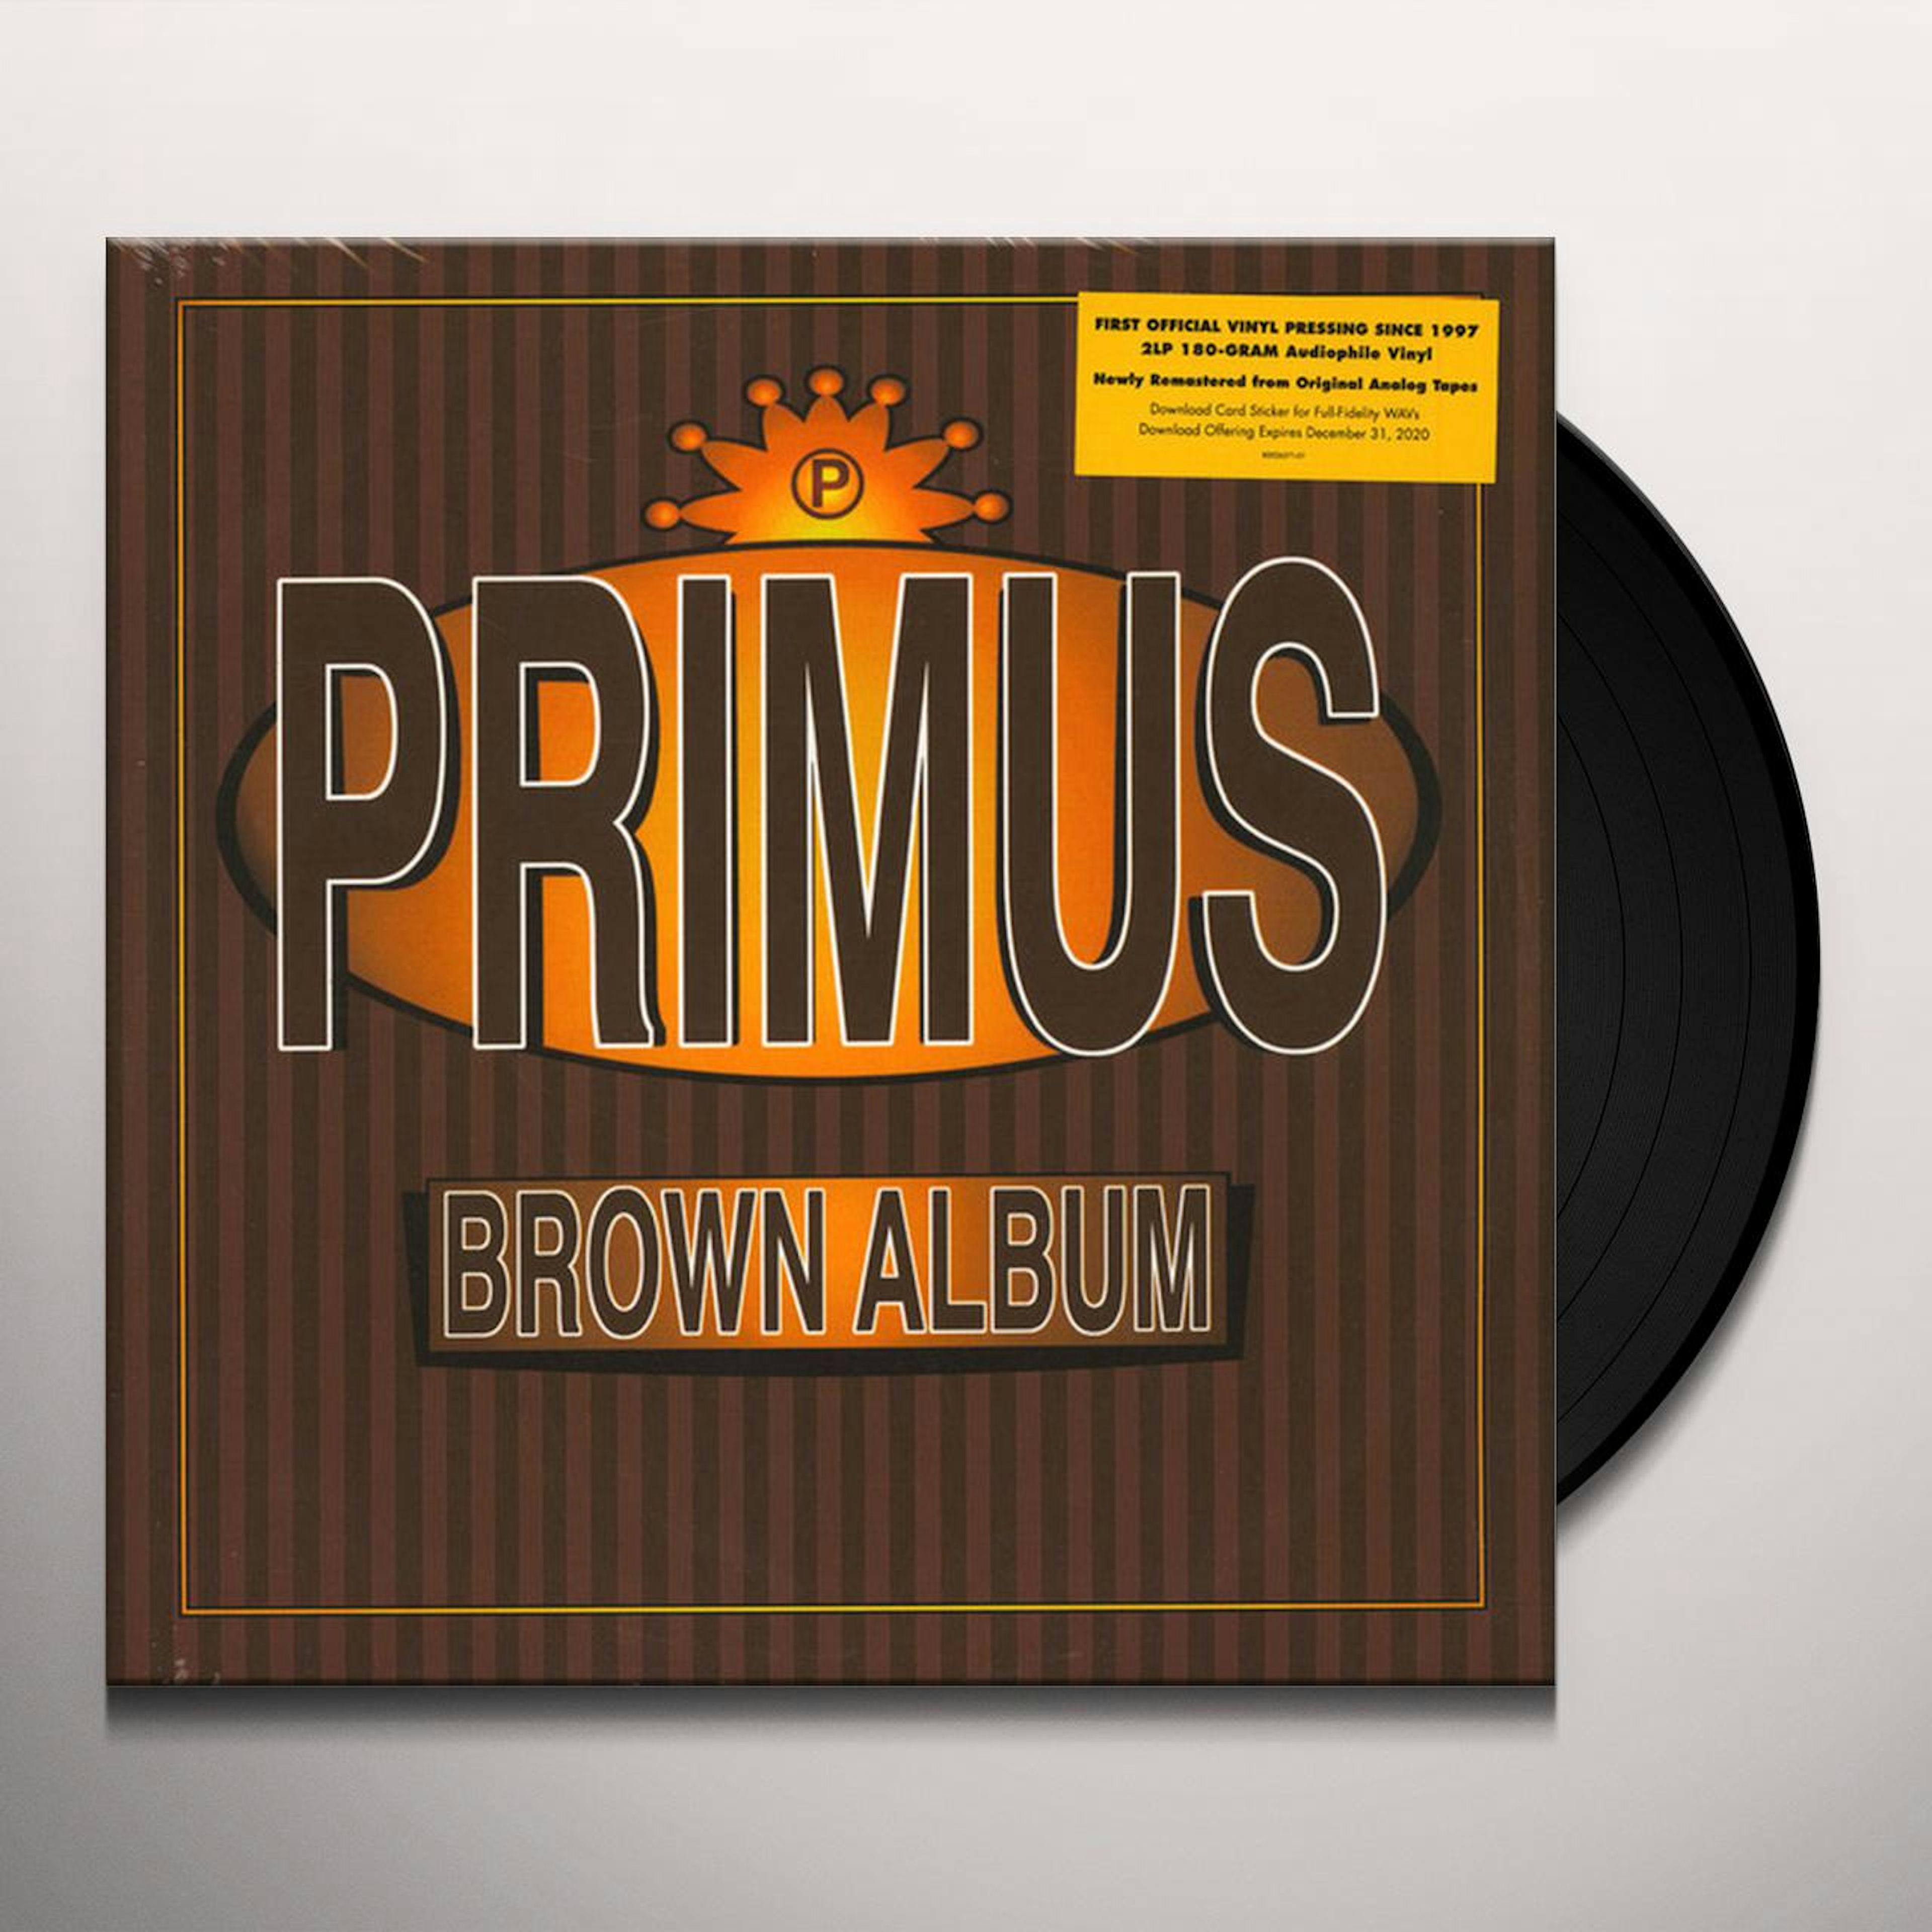 BROWN ALBUMS Record